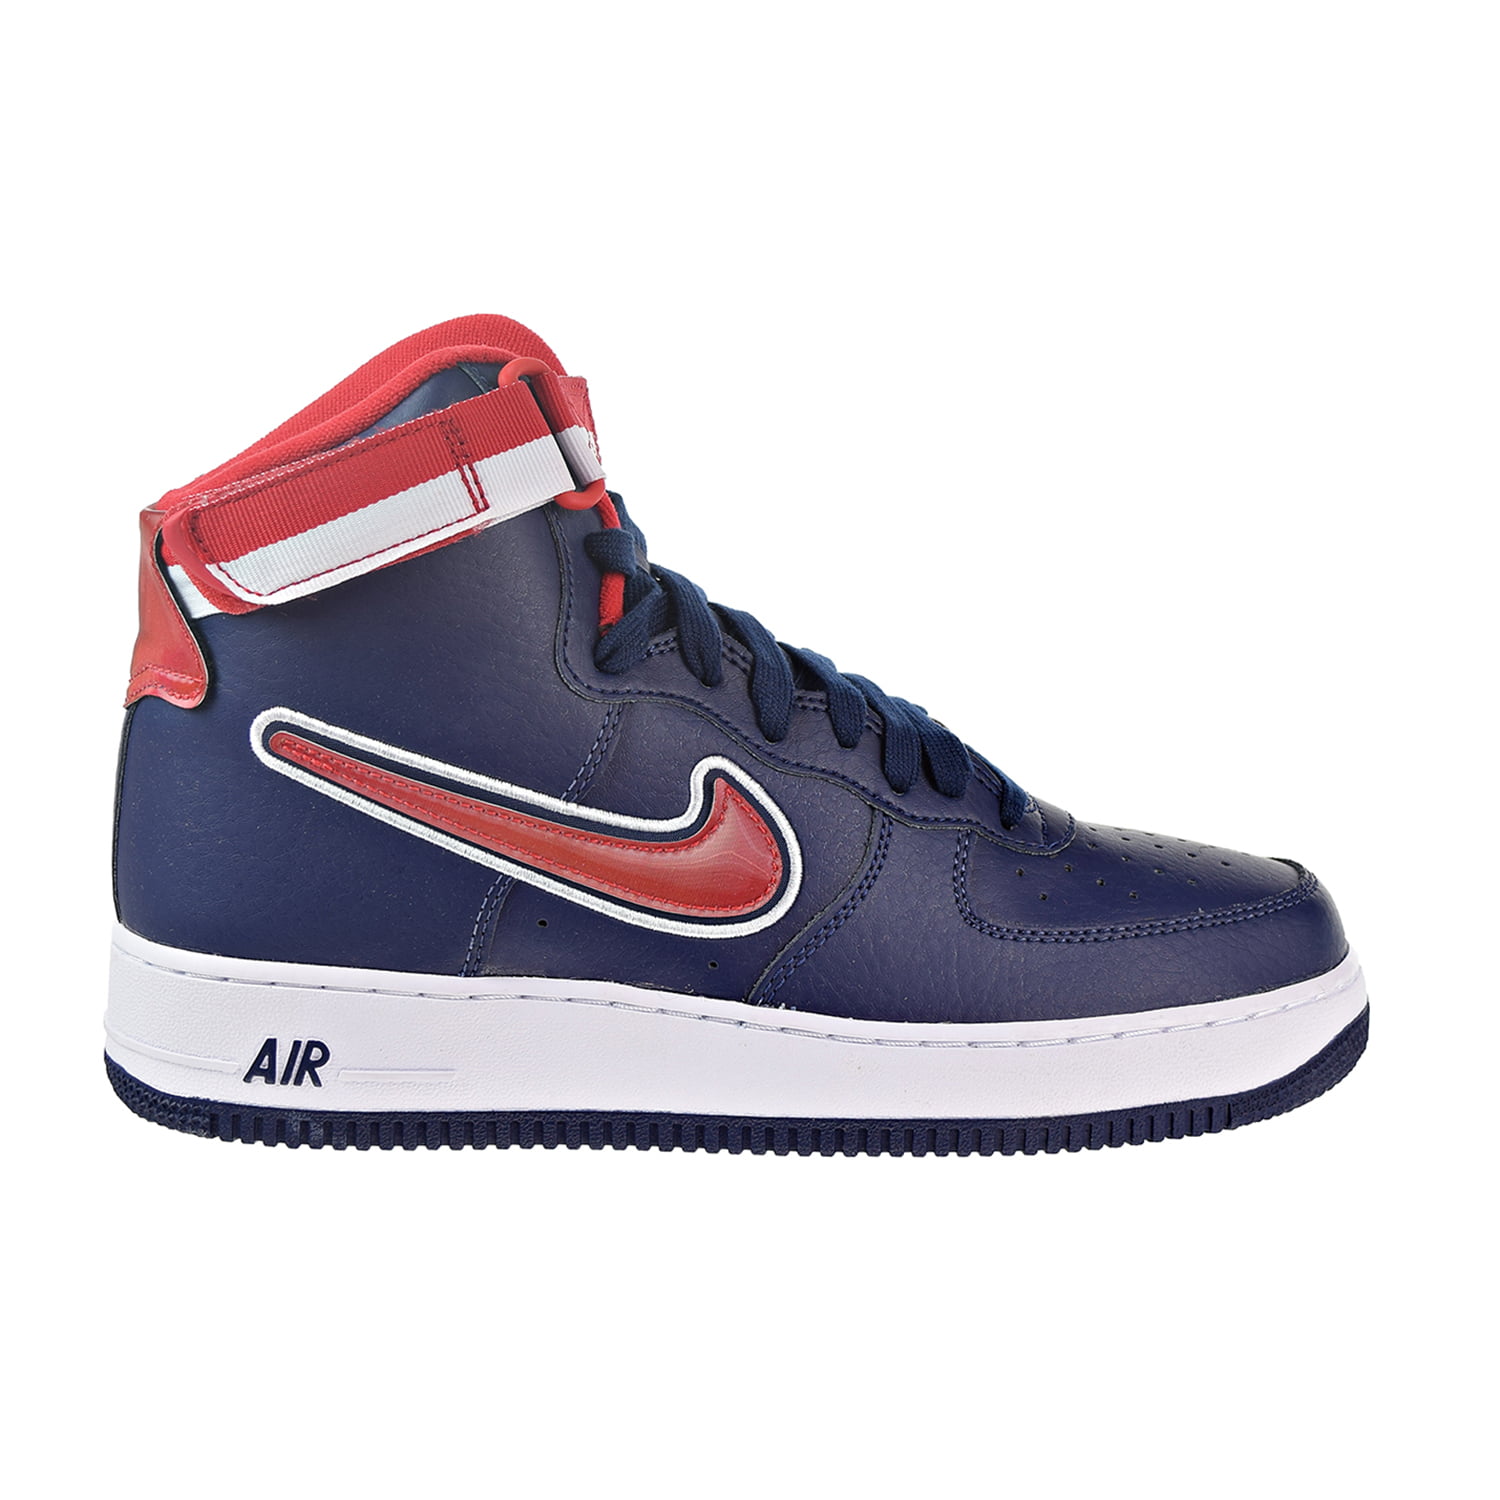 Nike Air Force 1 High '07 LV8 Sport Men's Shoes Midnight Navy/White/Red ...